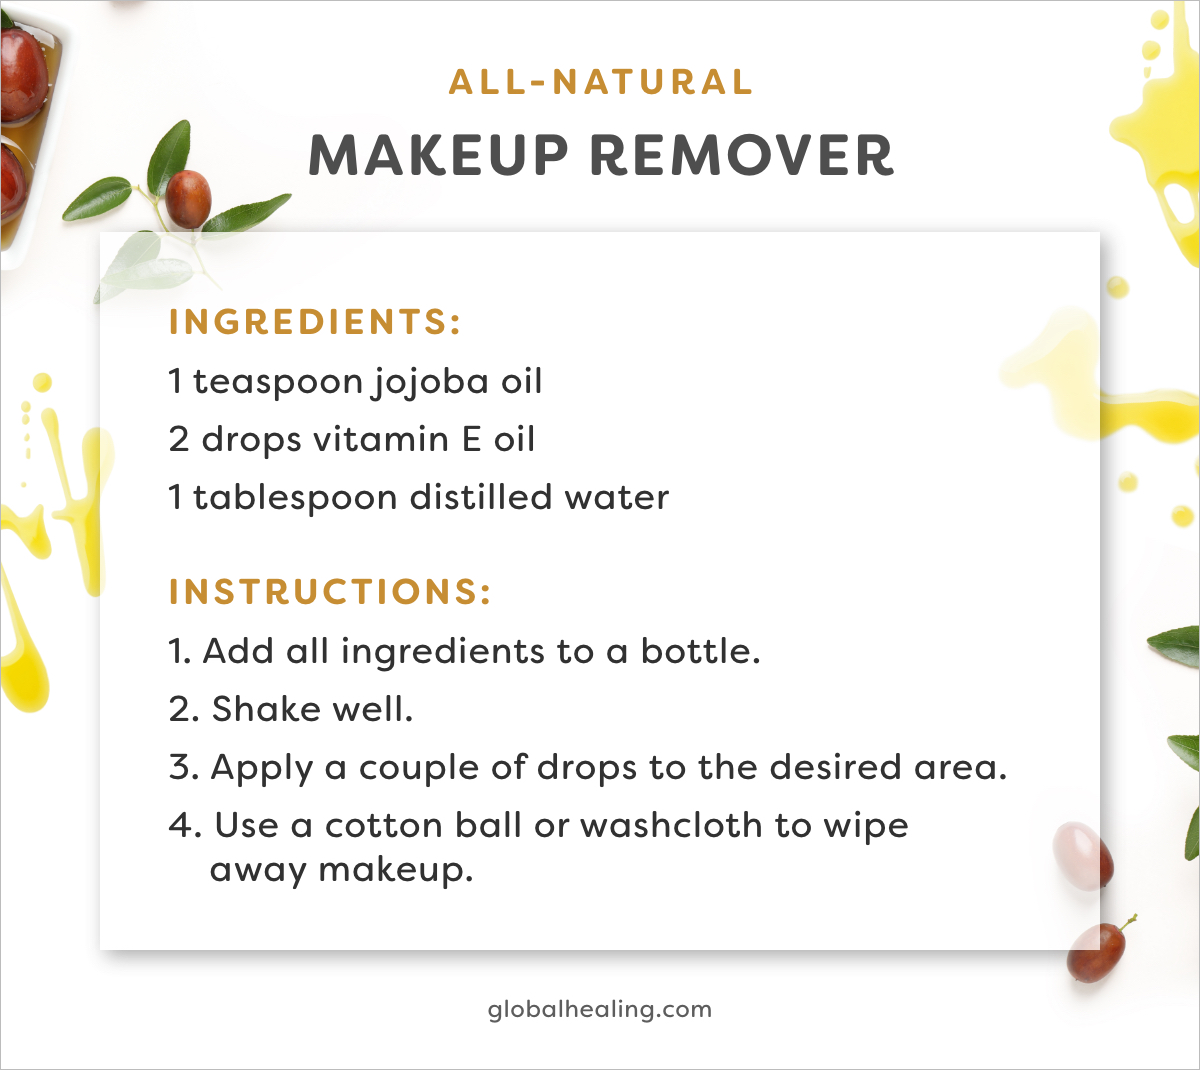 Try this easy makeup remover recipe that'll leave your skin feeling refreshed.